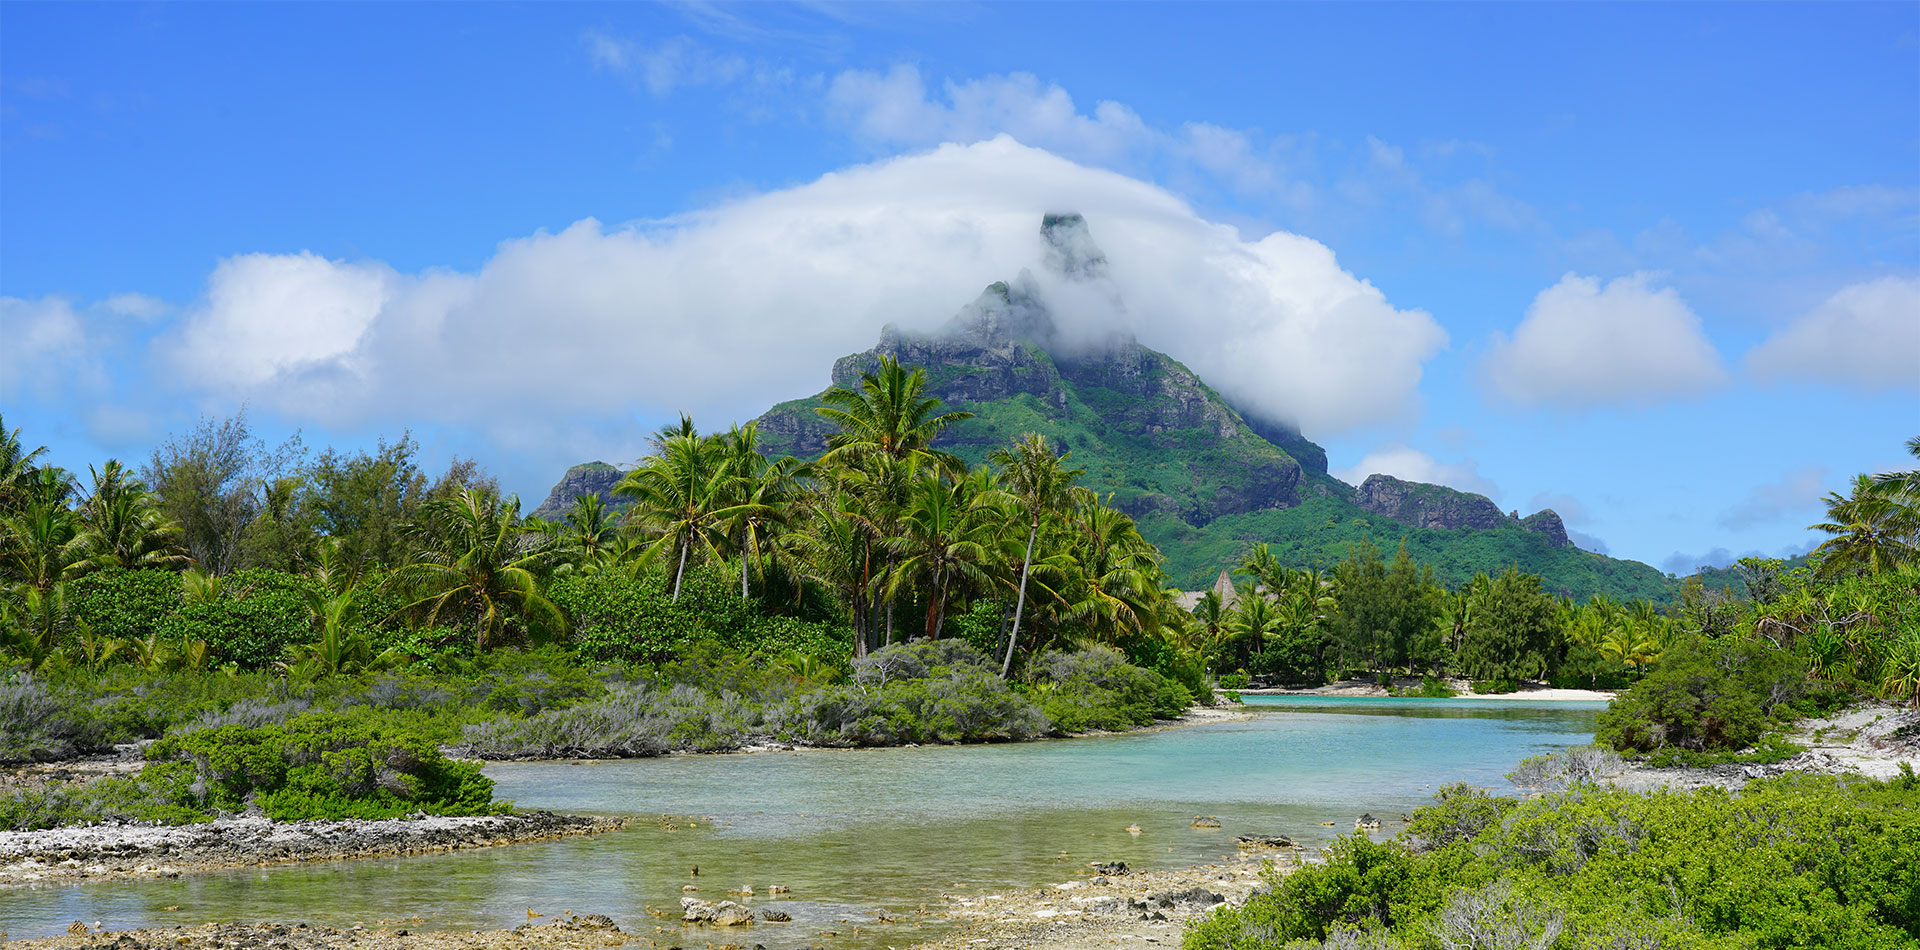 View of the Mont Otemanu mountain reflecting in water in Bora Bora, French Polynesia, South Pacific